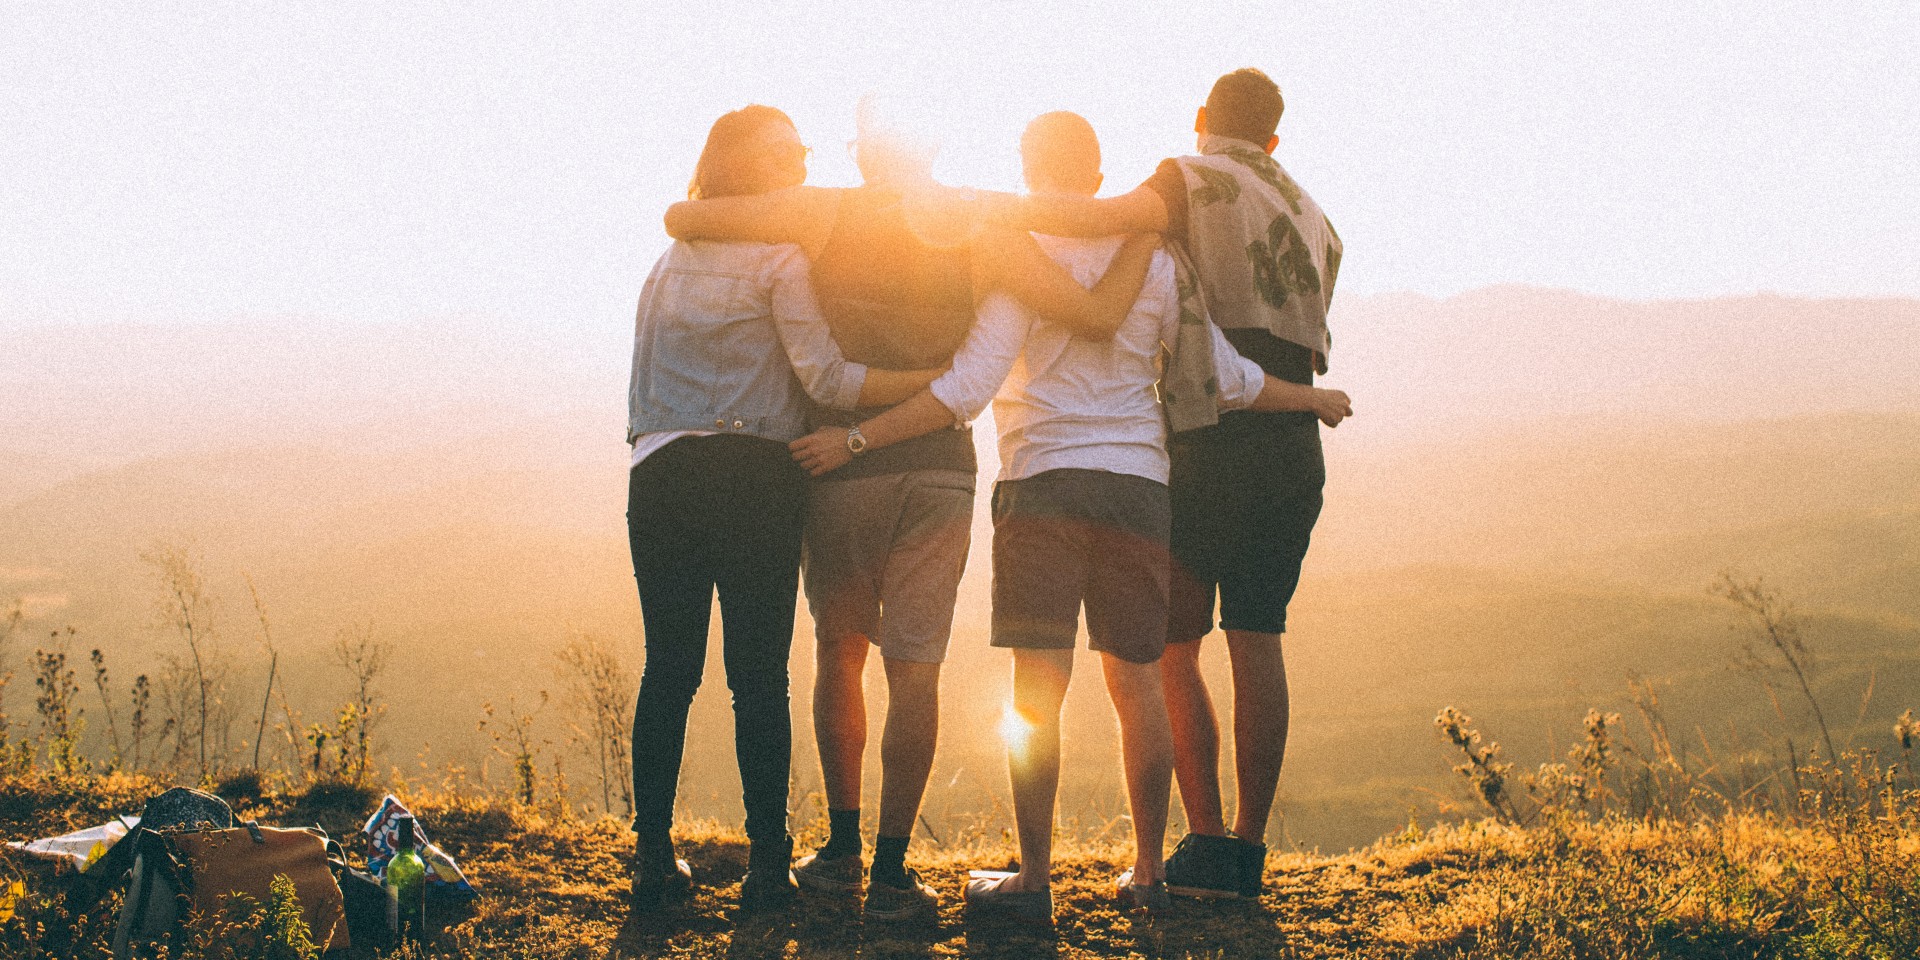 Four young people with their arms around each other watching the sunset from a viewpoint.